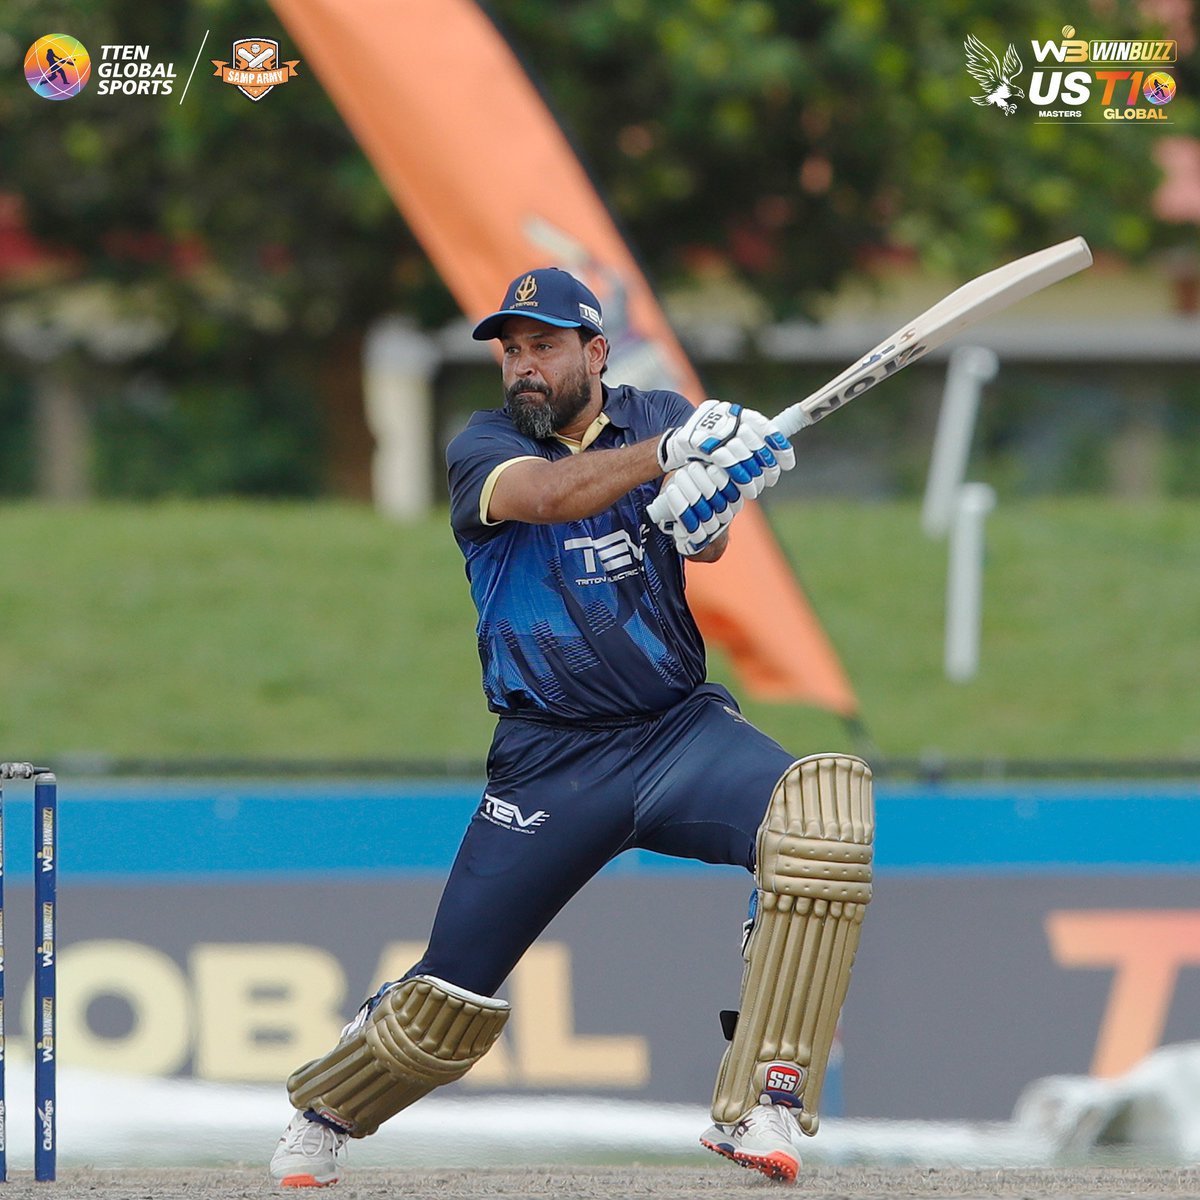 PATHAN GOES ⬇️ THE 🏟️
PATHAN GOES OUTTA THE 🏟️

4️⃣6️⃣6️⃣4️⃣6️⃣6️⃣

@iamyusufpathan has made this chase light work for the 🆕 Jersey Triton’s 🎉🎊🥳🙌

#NJTvCK
#USMastersT10 
#SunshineStarsSixes
#CricketsFastestFormat
#T10League